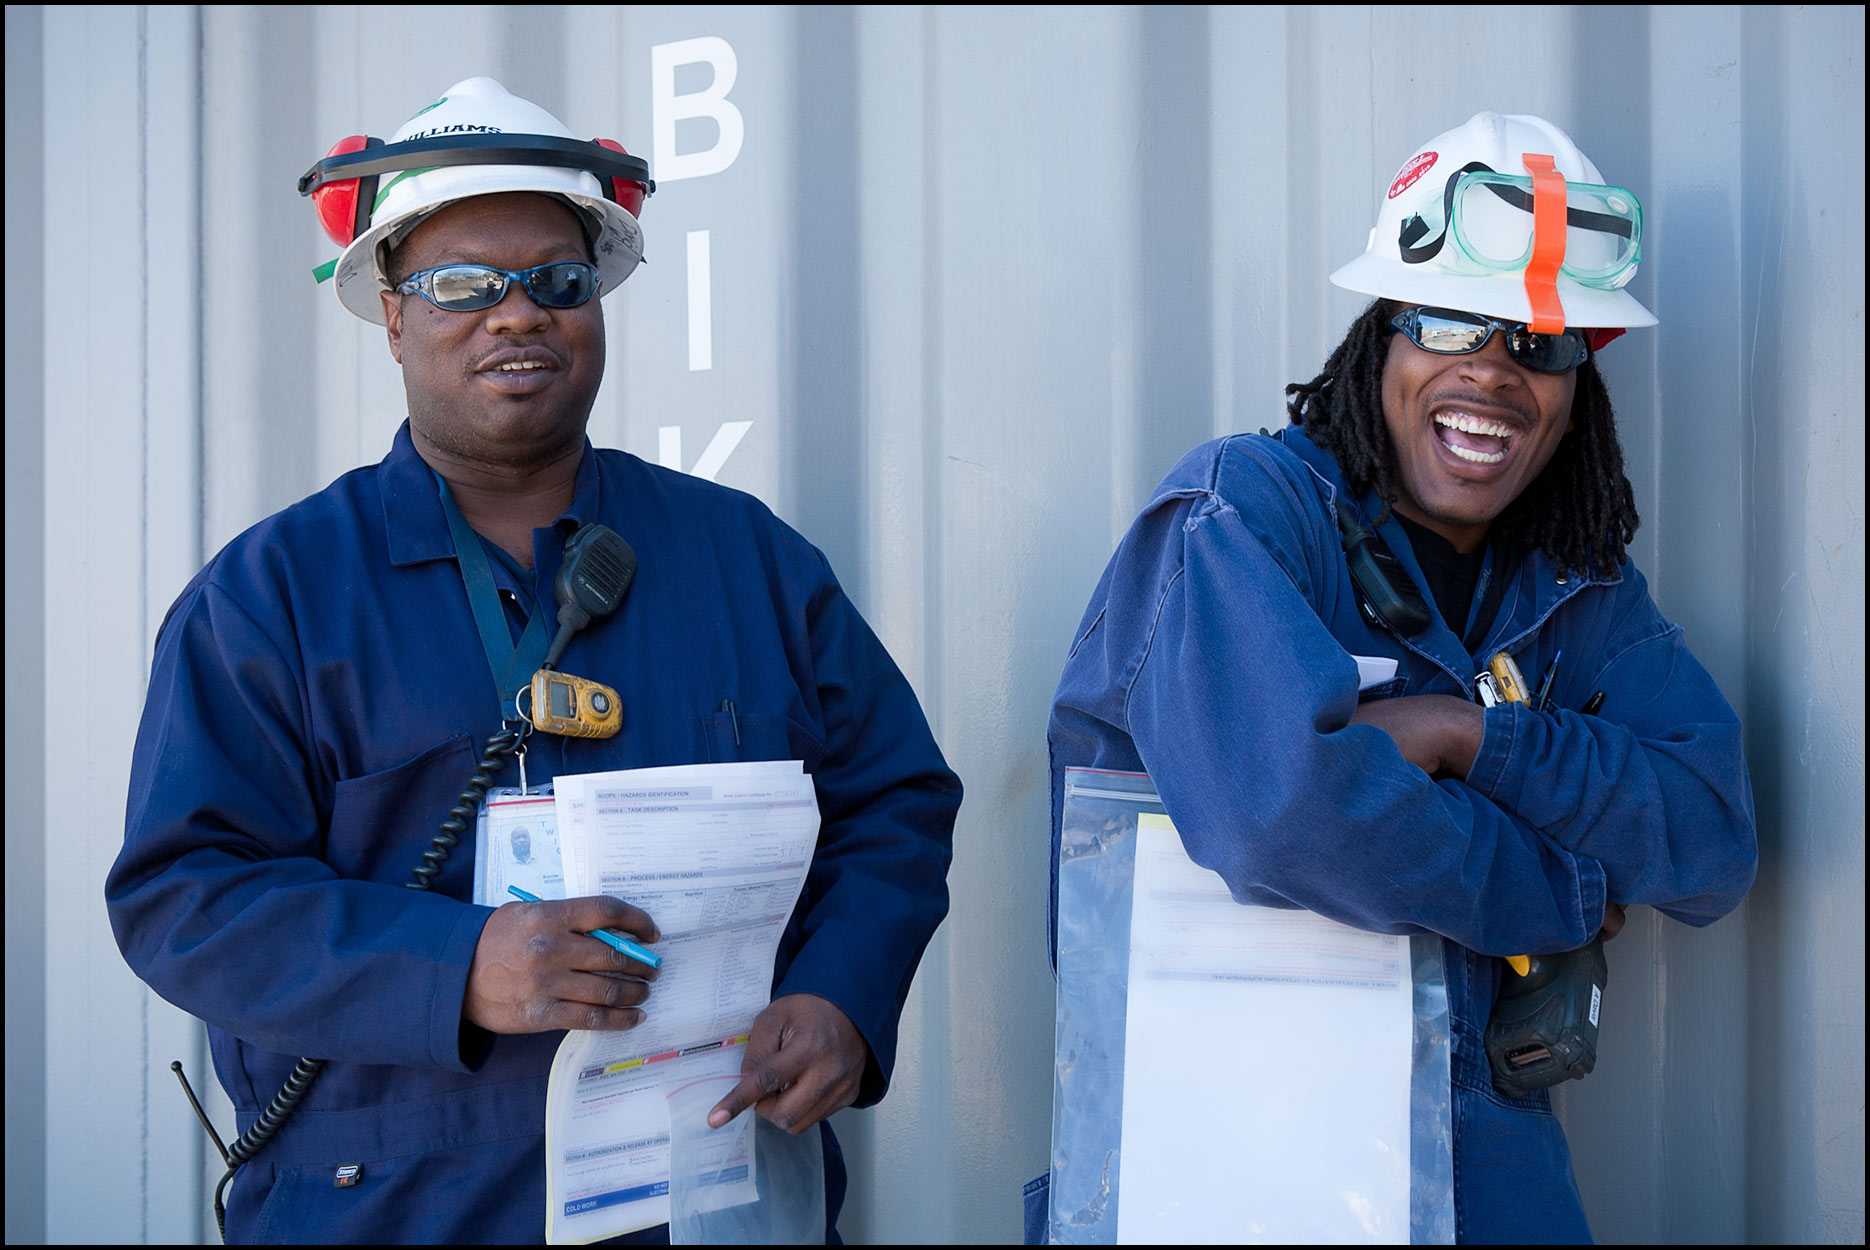 Two refinery workers in safety gear (PPE) have a laugh during a break from paperwork.